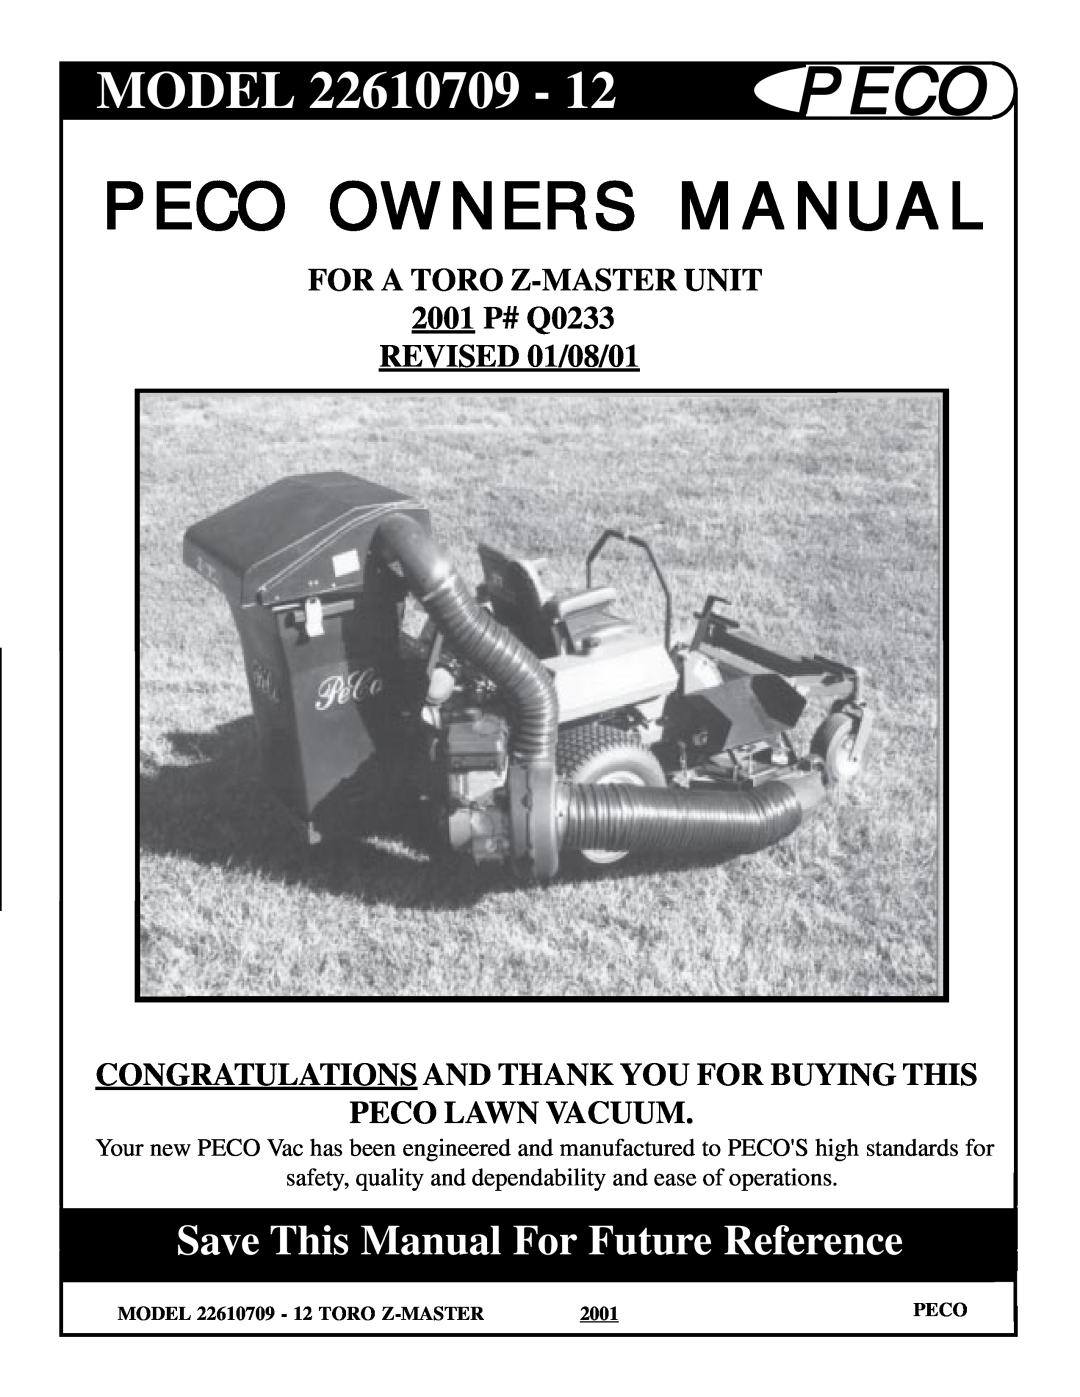 Toro owner manual MODEL 22610709, Peco Owners Manual, Save This Manual For Future Reference, REVISED 01/08/01, 2001 